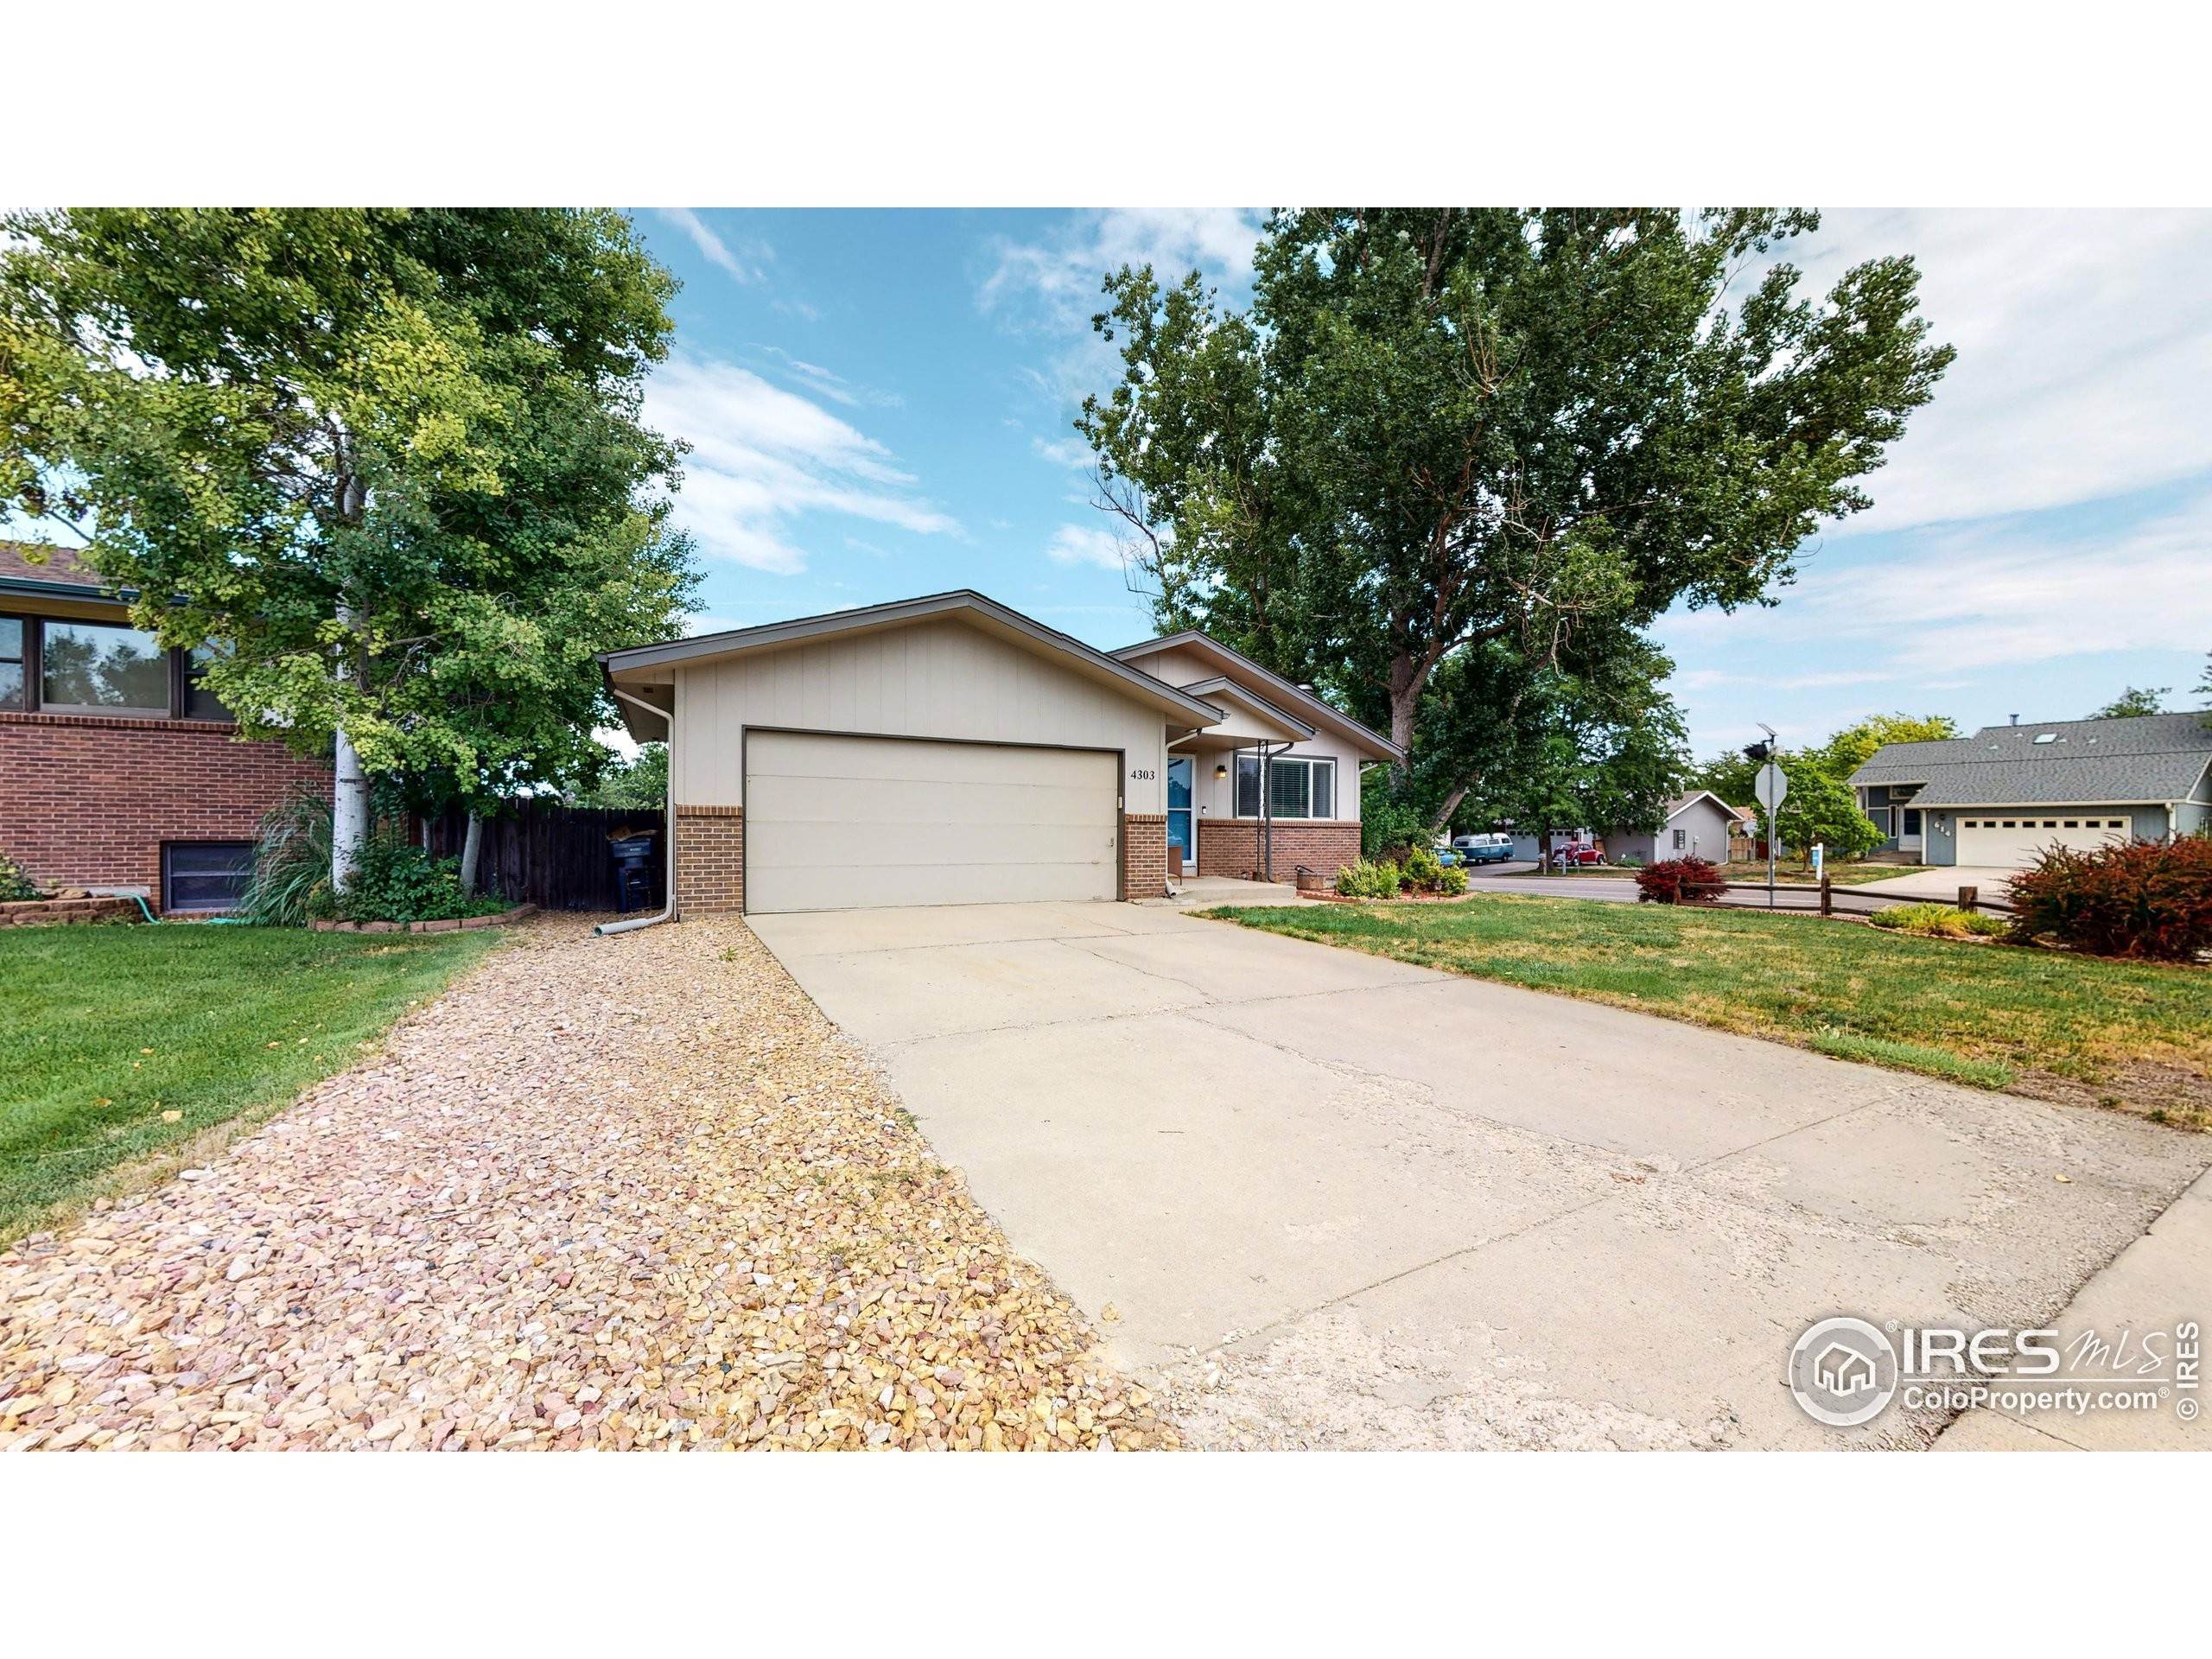 2. Single Family Homes for Active at 4303 W 7th Street Greeley, Colorado 80634 United States